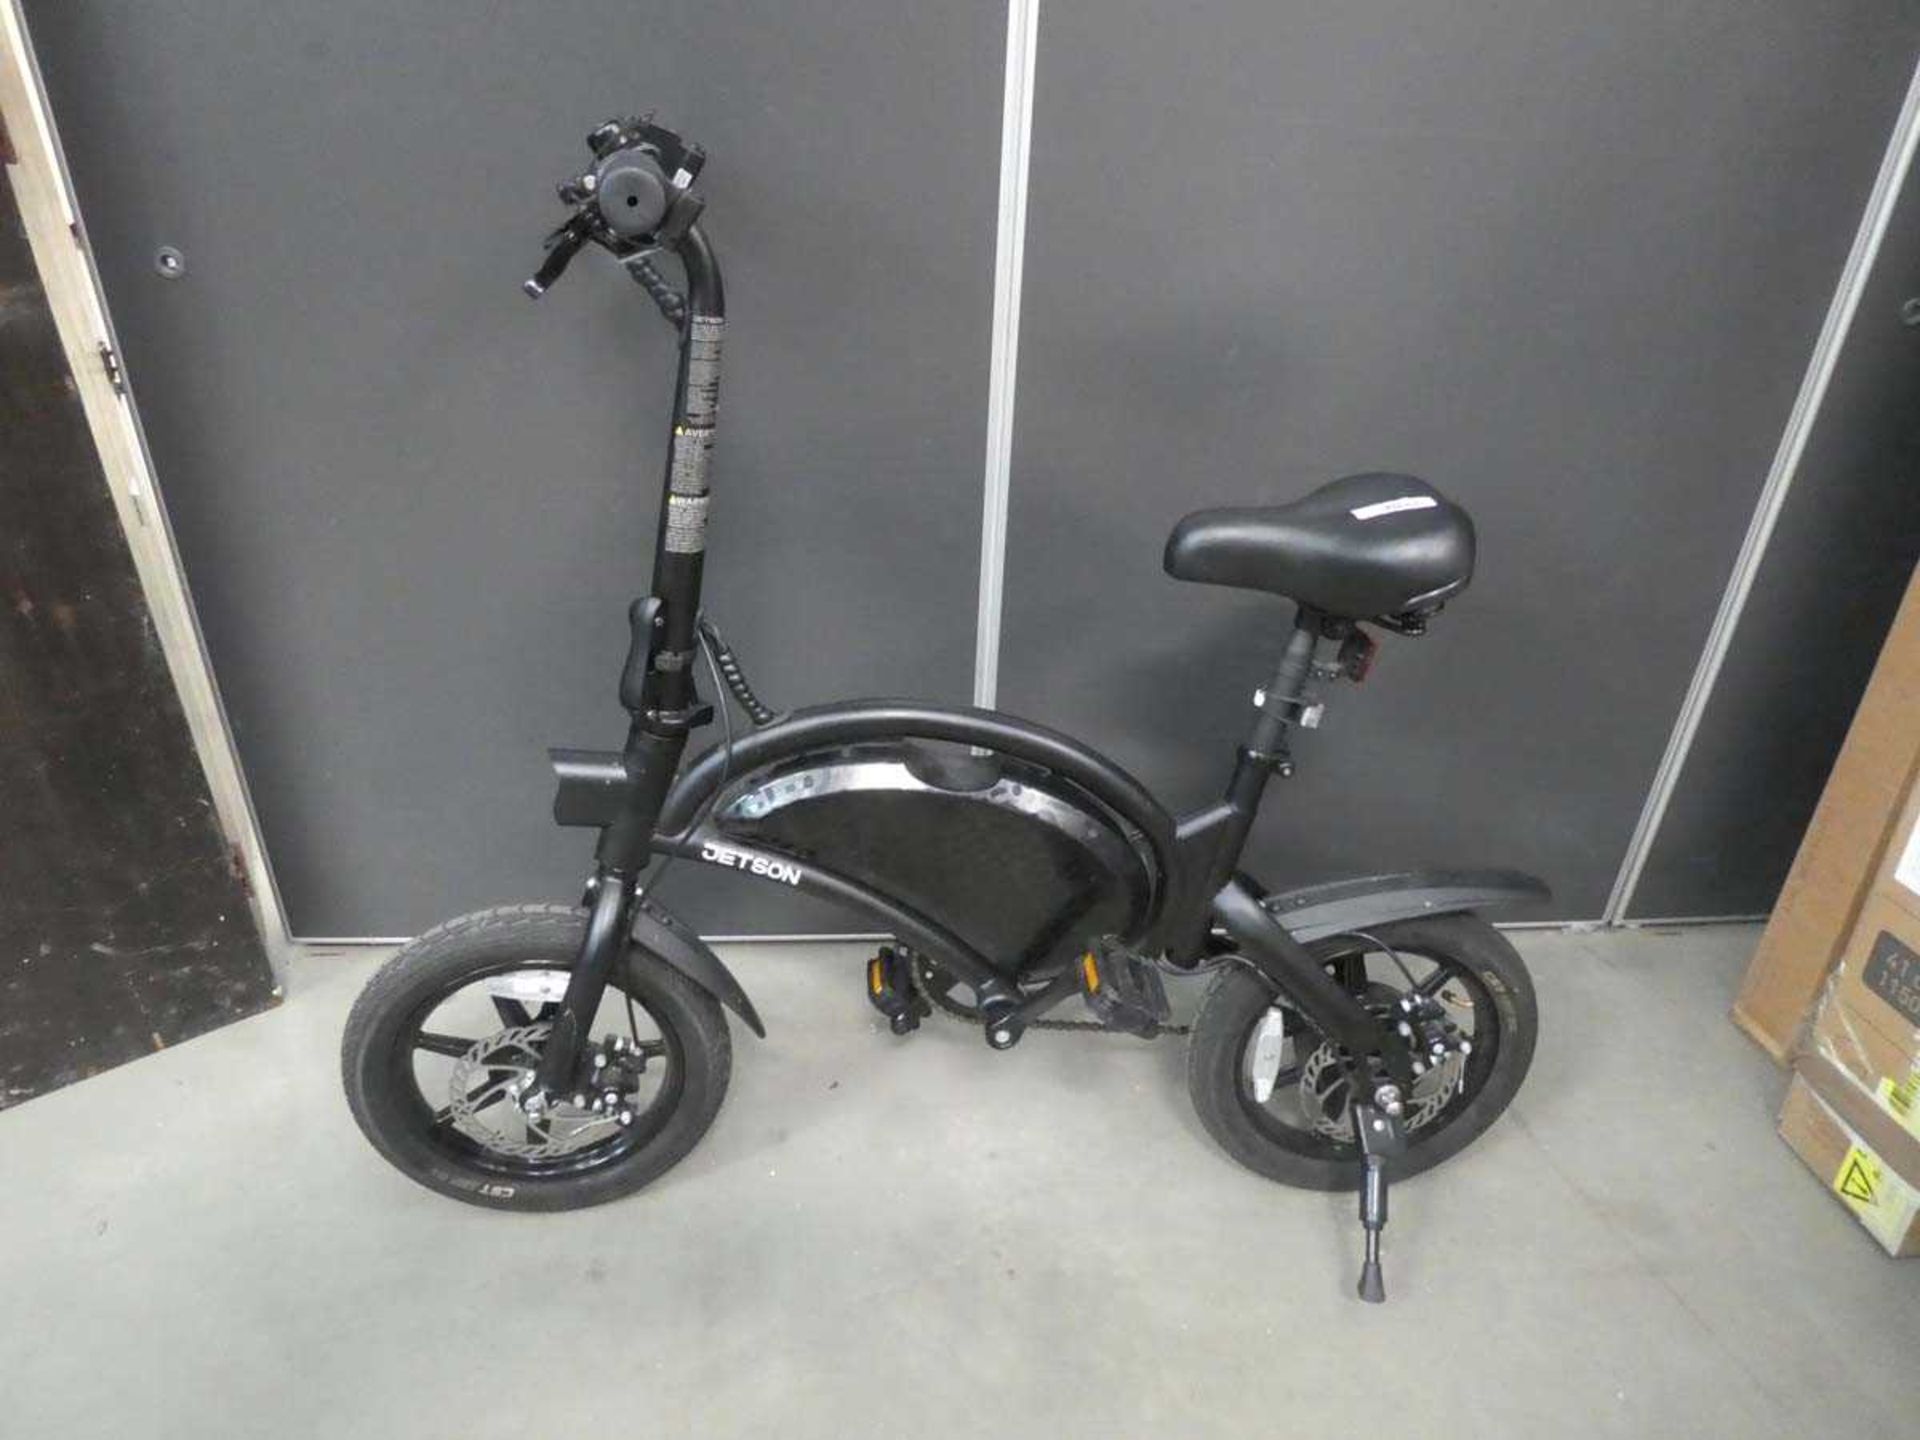 +VAT Jetson electric cycle, no charger